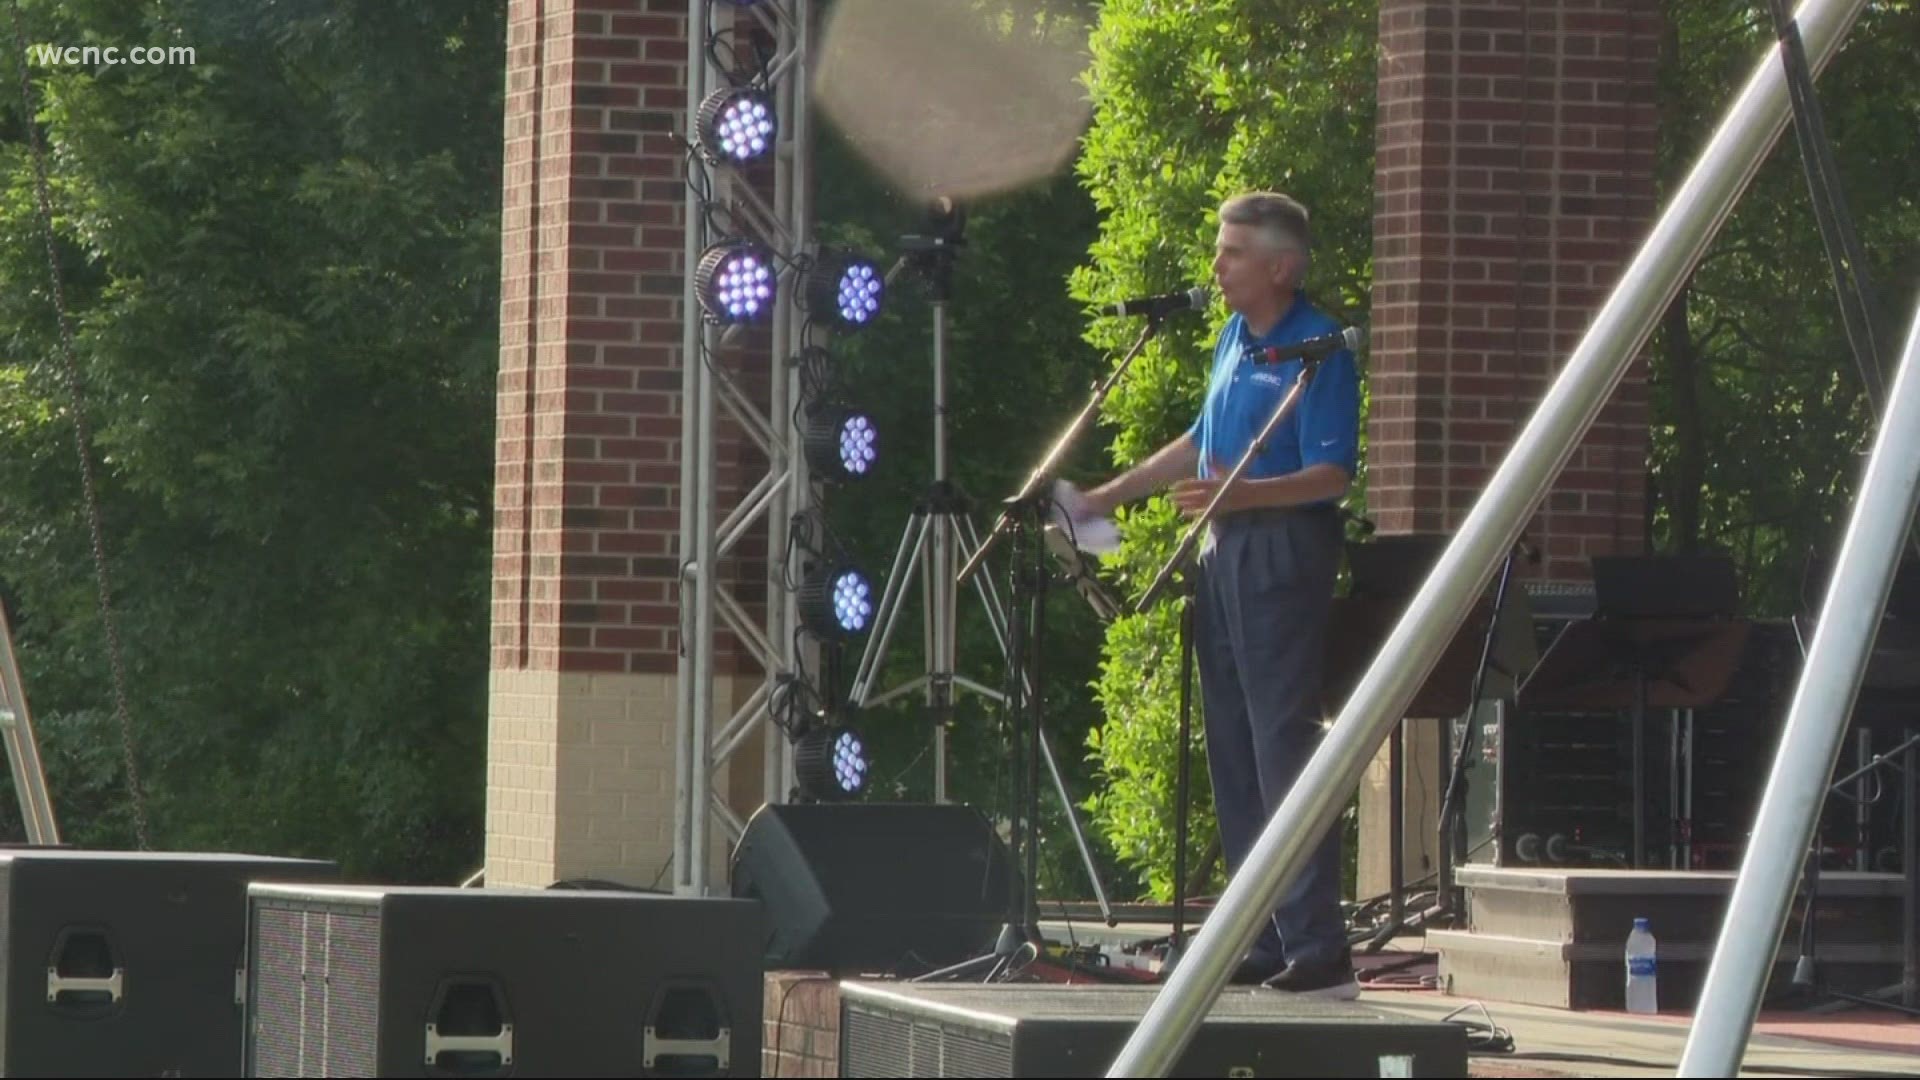 The annual patriotic event was once again emceed by Larry Sprinkle and was open to the public.